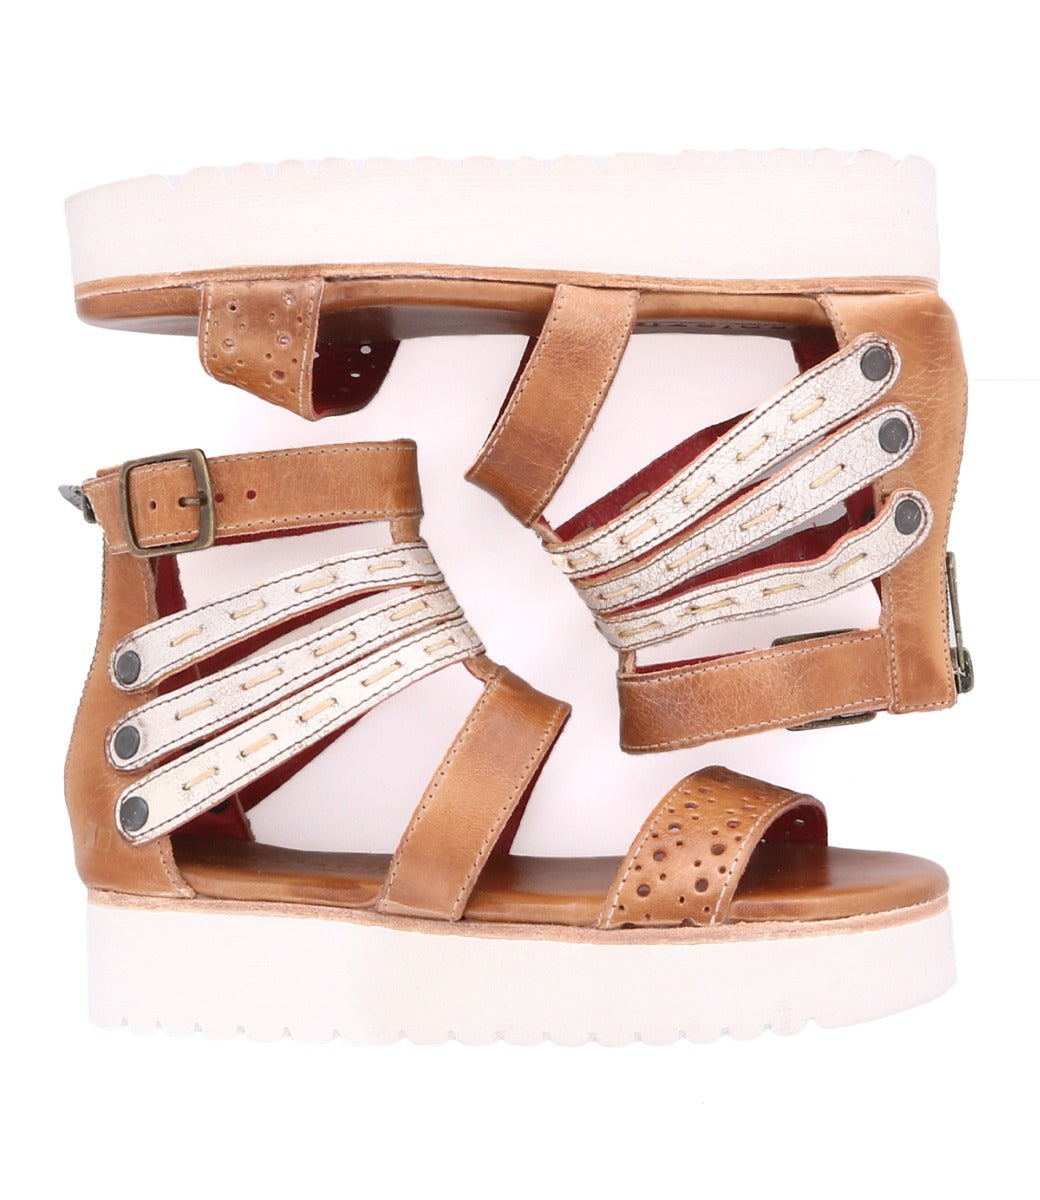 A pair of Artemia sandals with white straps from Bed Stu.